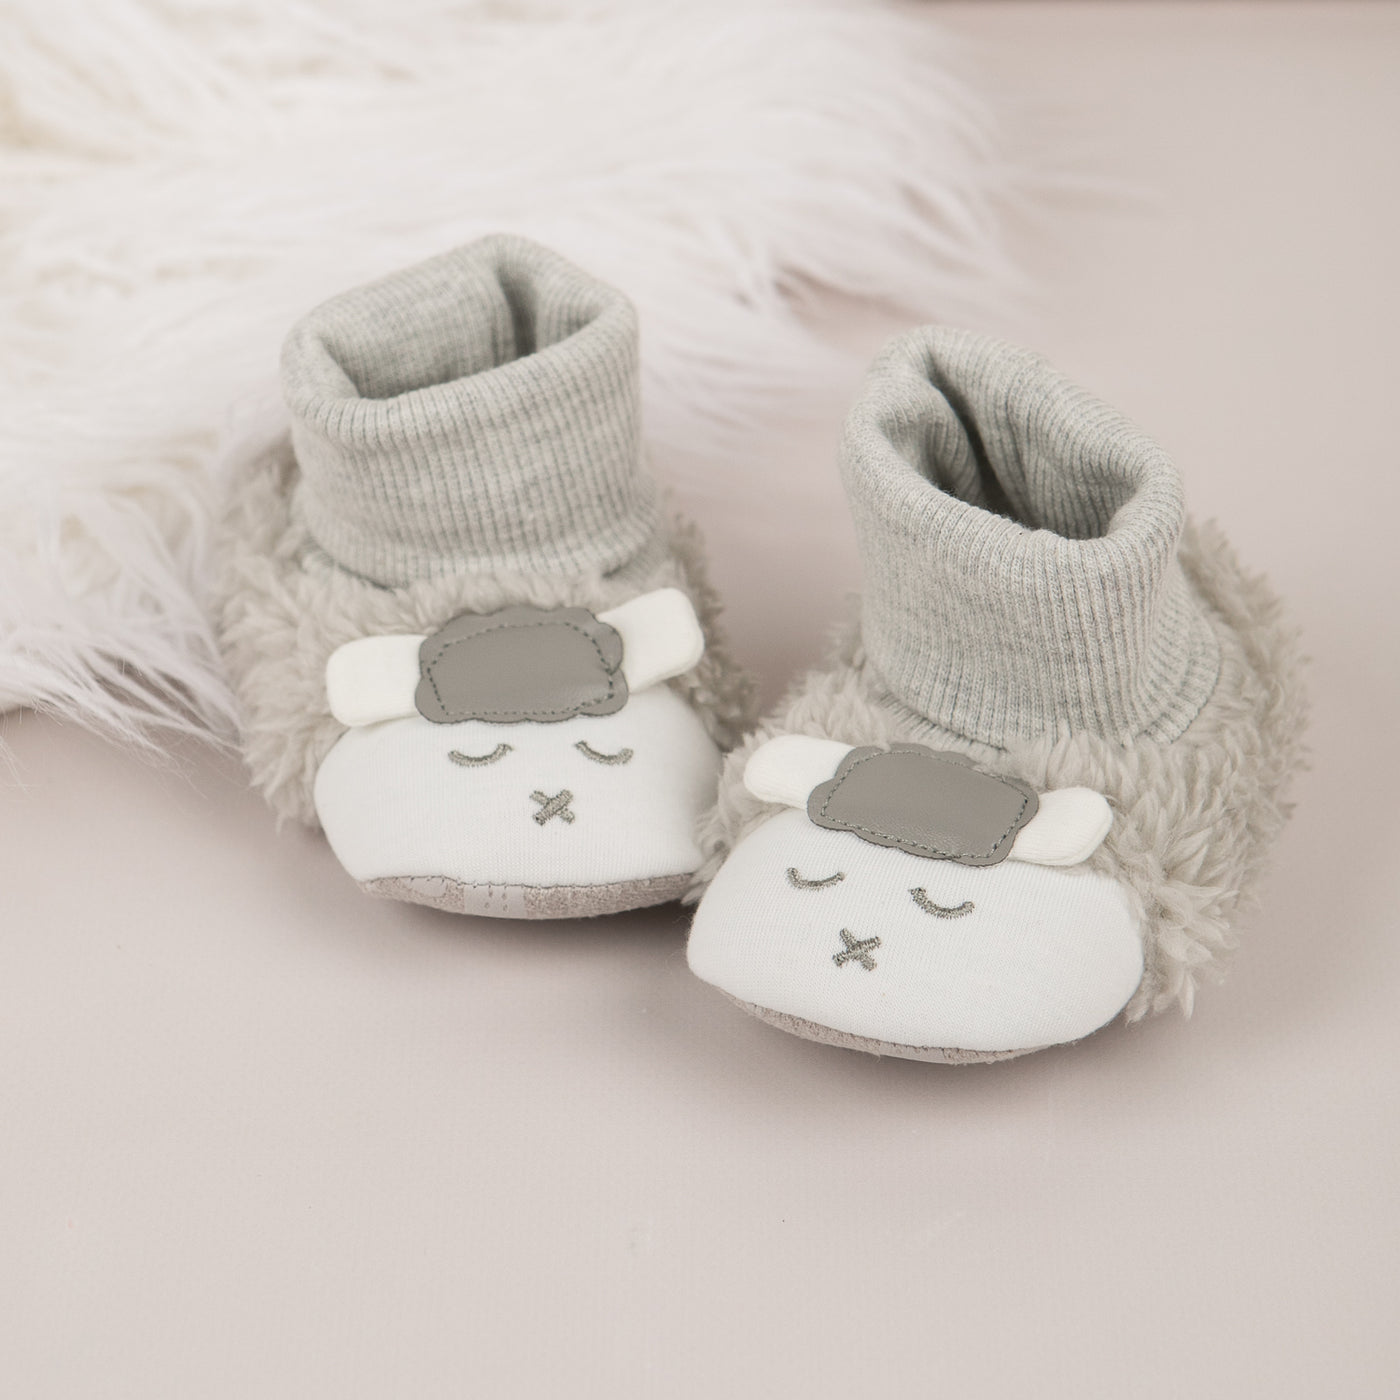 "Baby's First" Lamb Booties